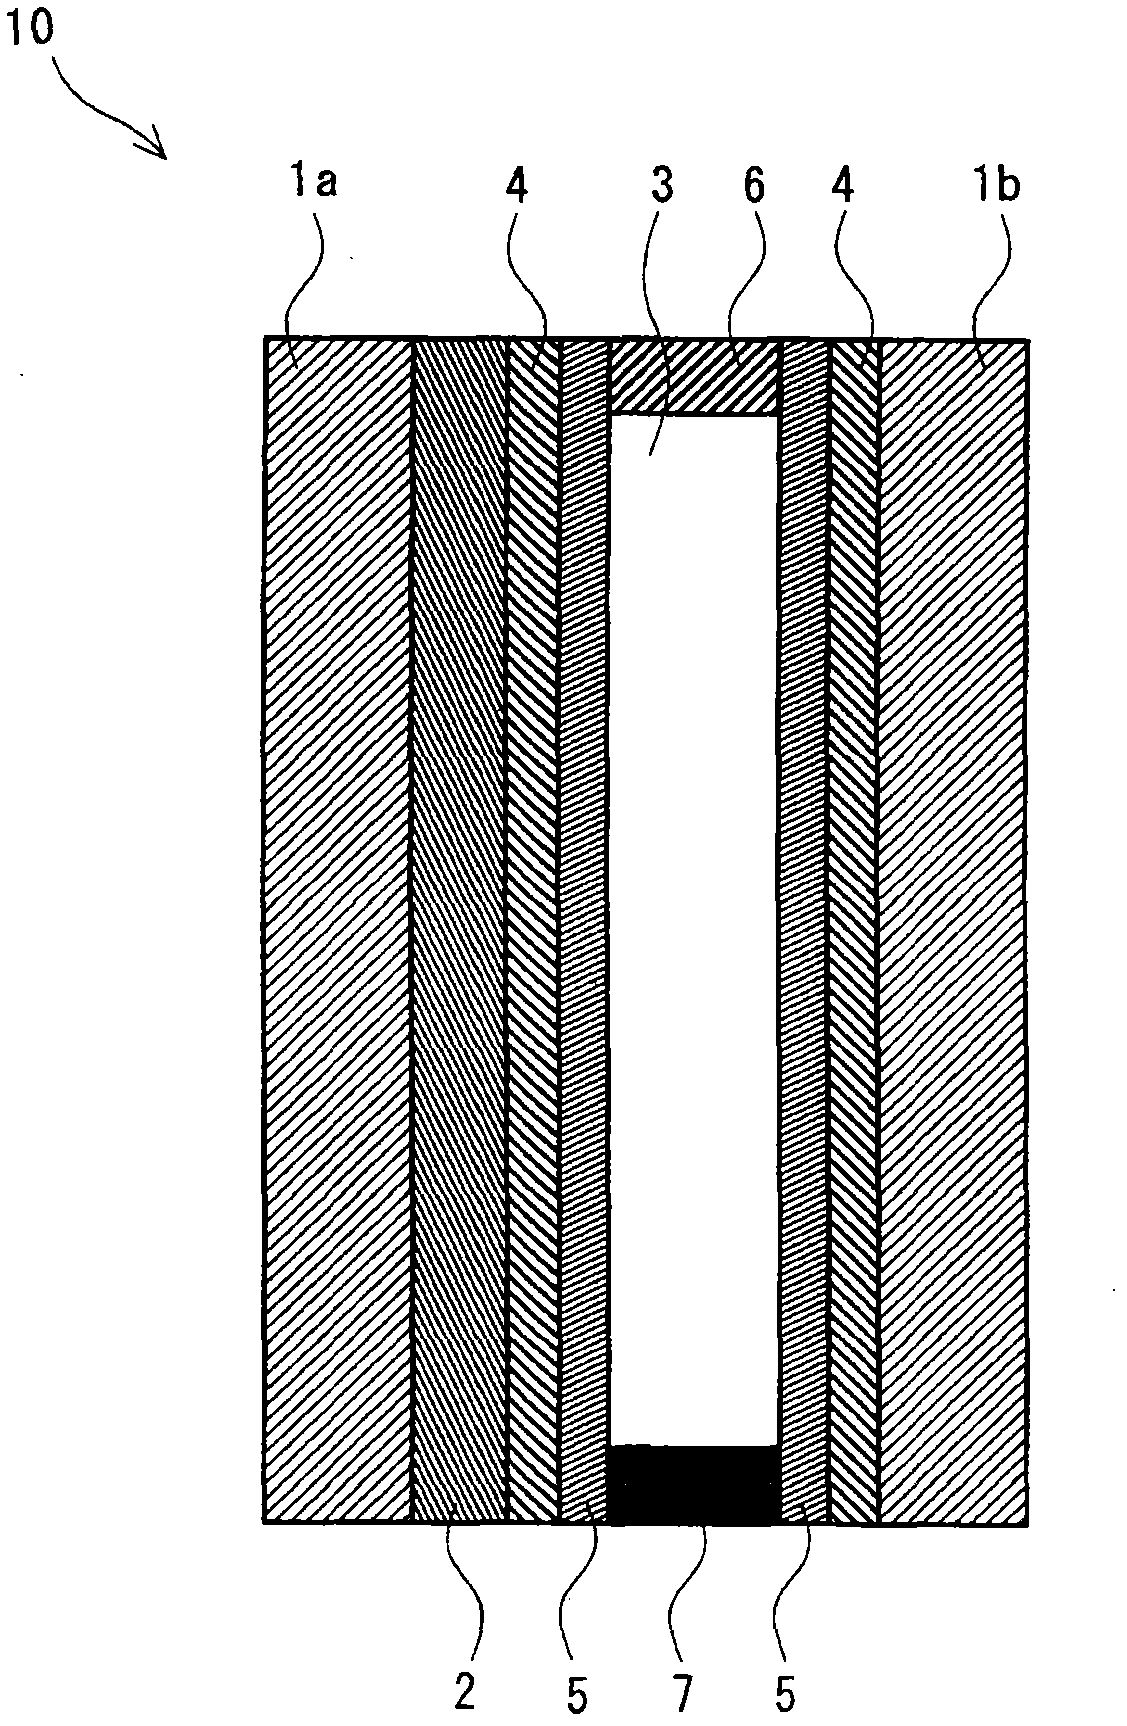 Liquid crystal display device, positive radiation-sensitive composition, interlayer insulating film for liquid crystal display device and method for forming the same